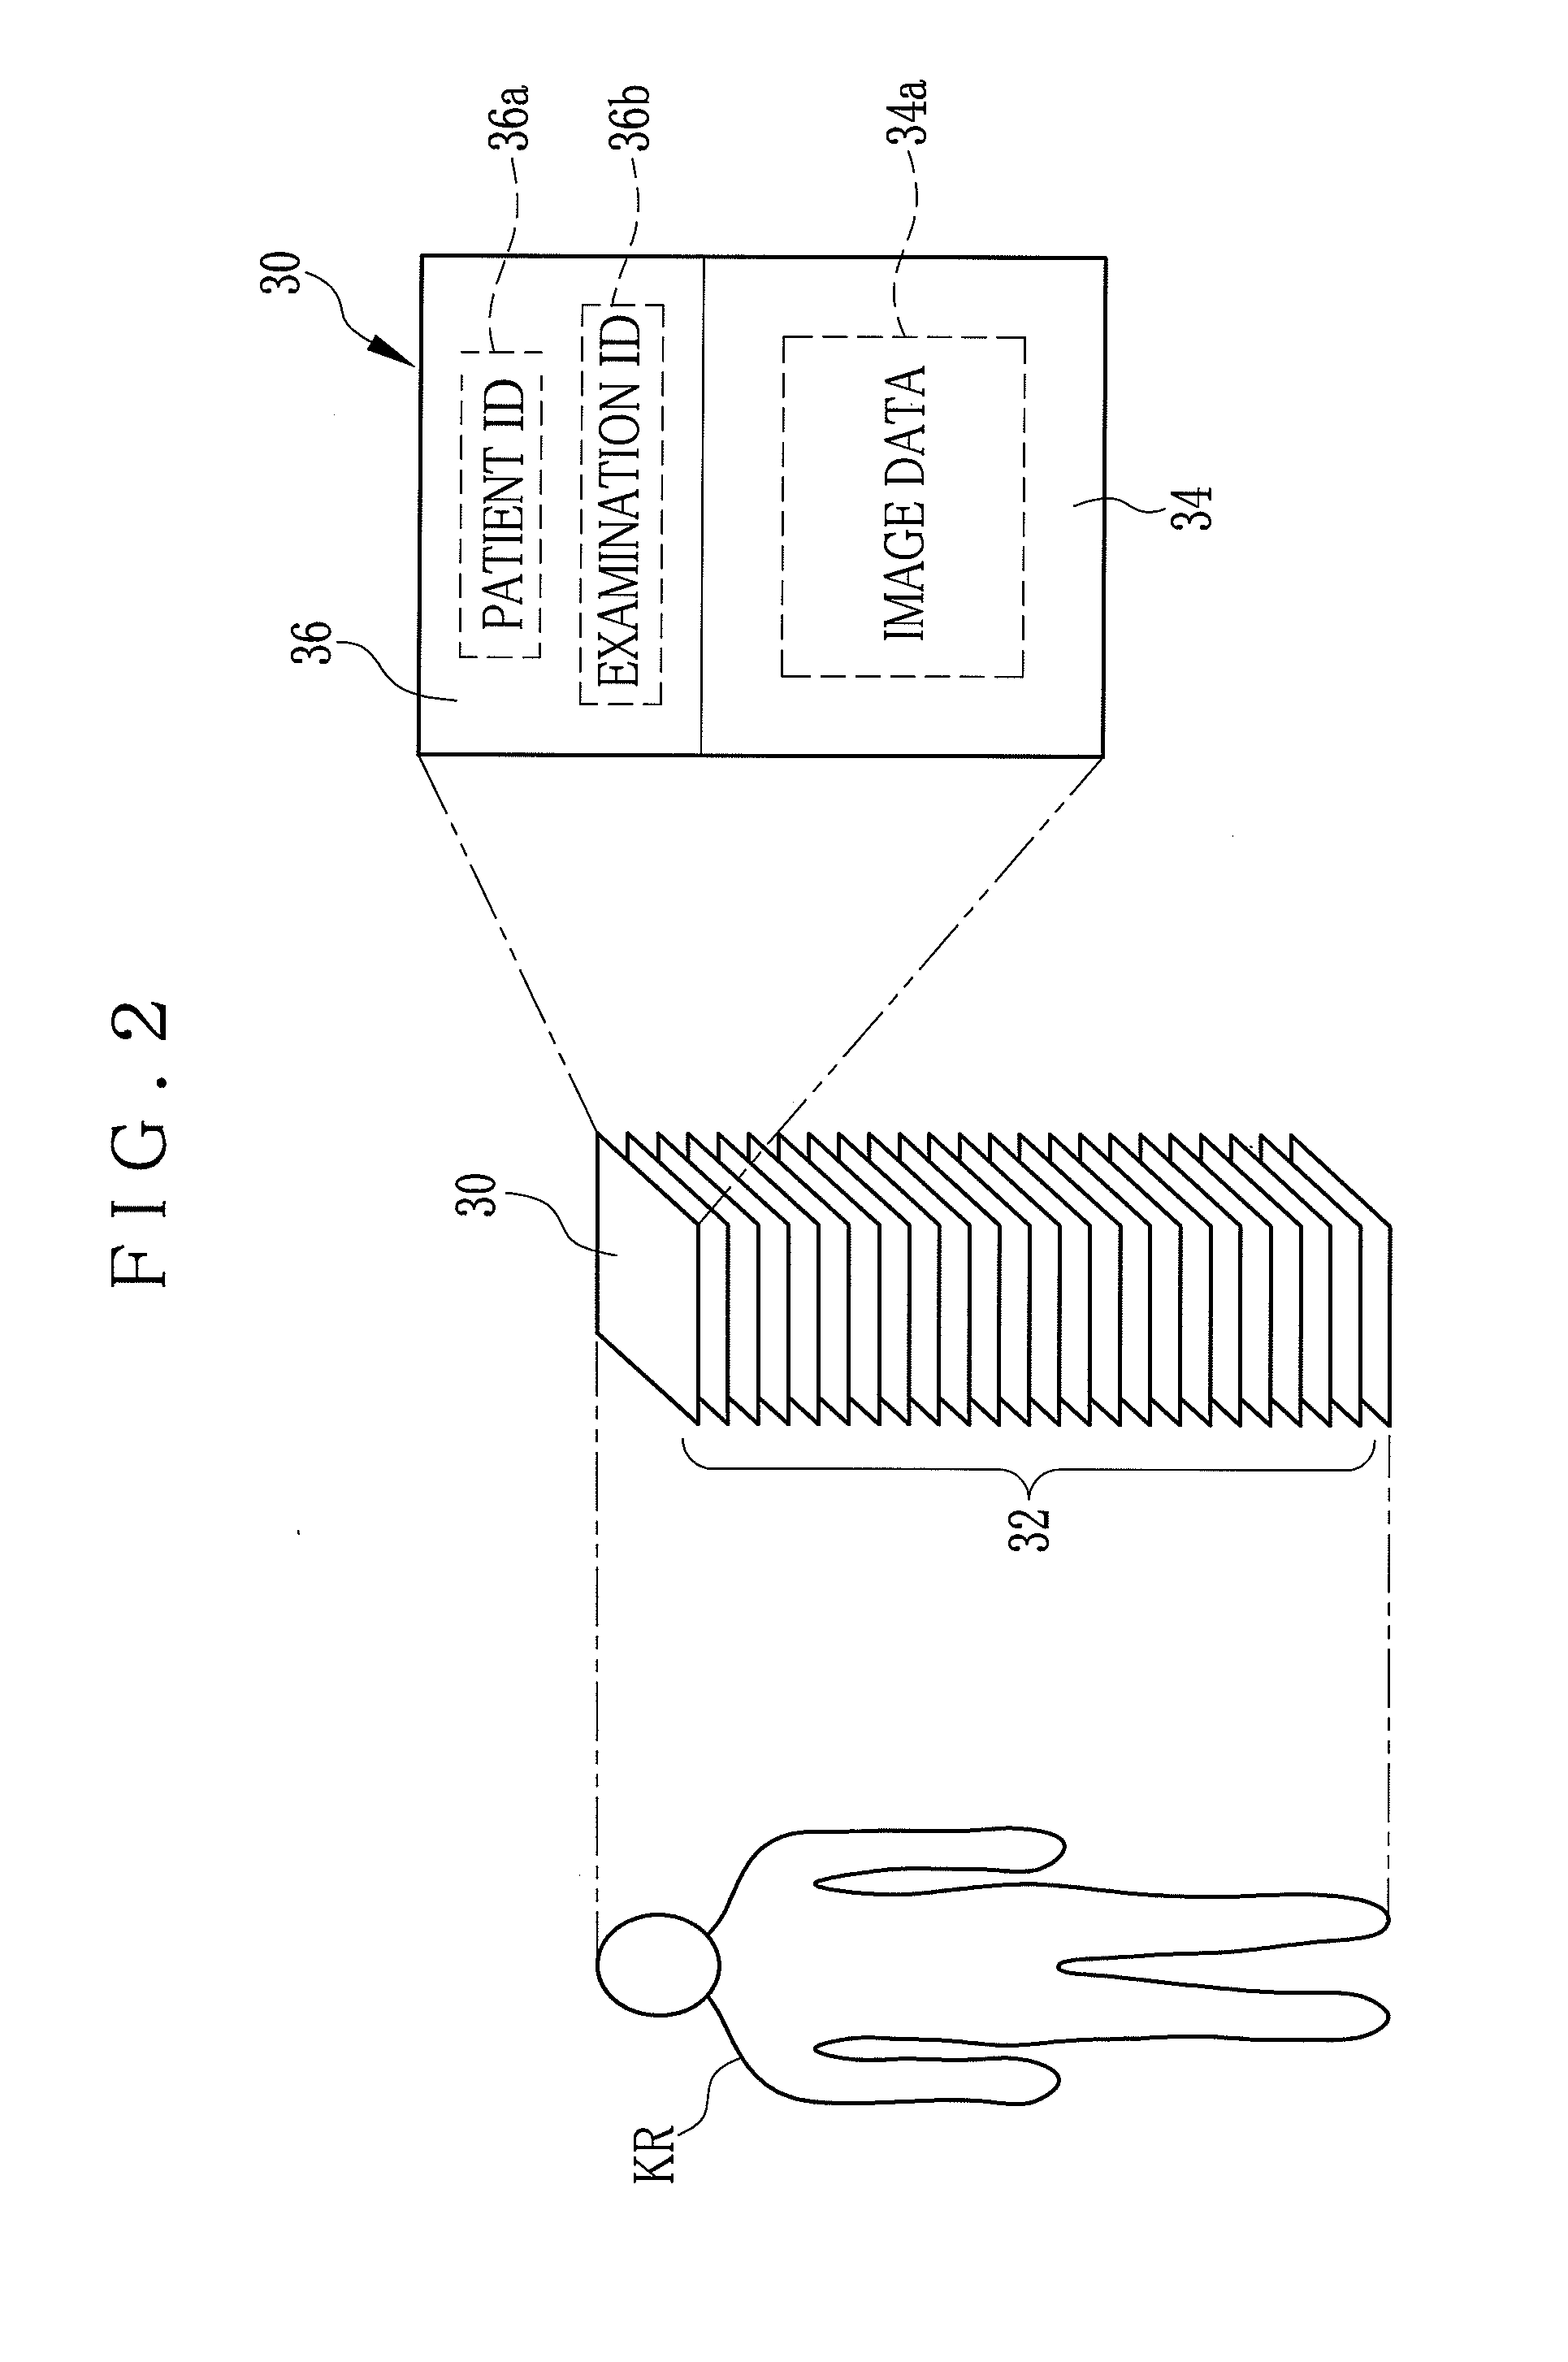 Image display system, apparatus and method